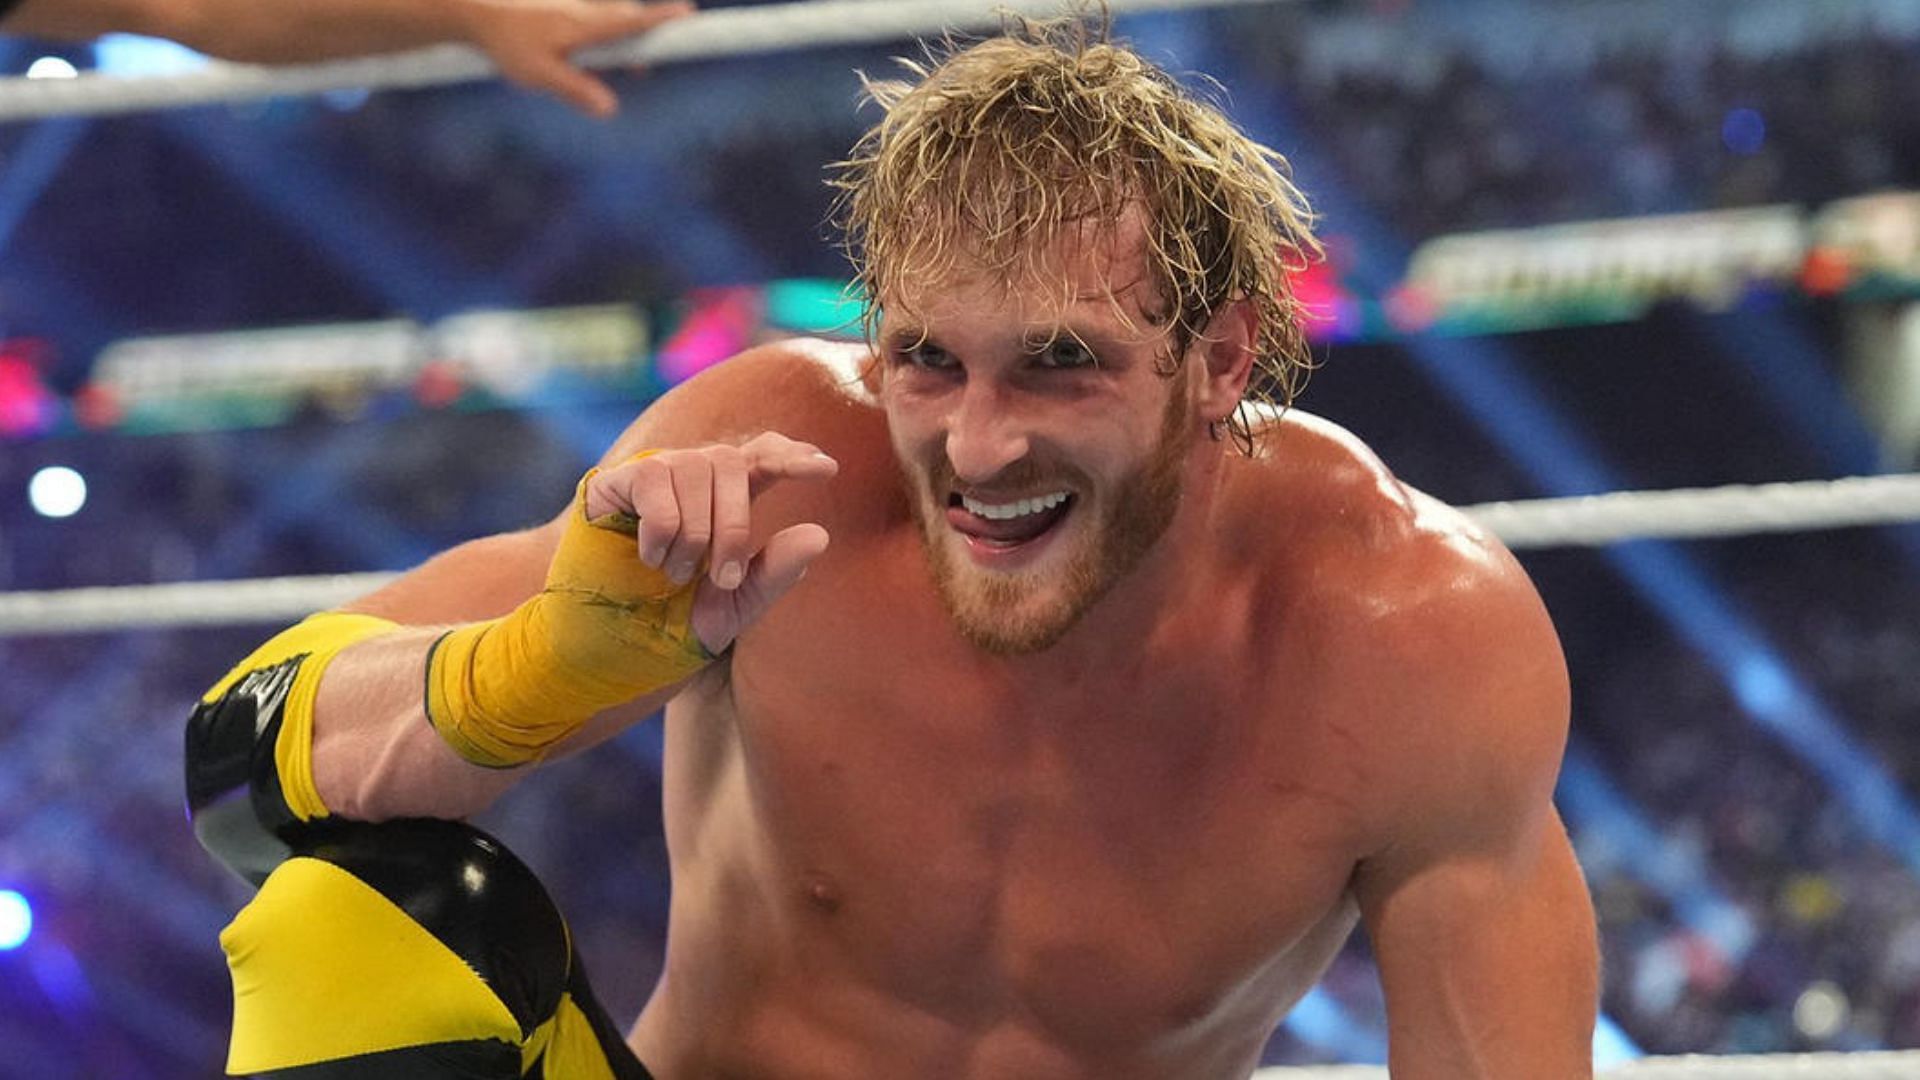 Logan Paul is undefeated at WWE SummerSlam!